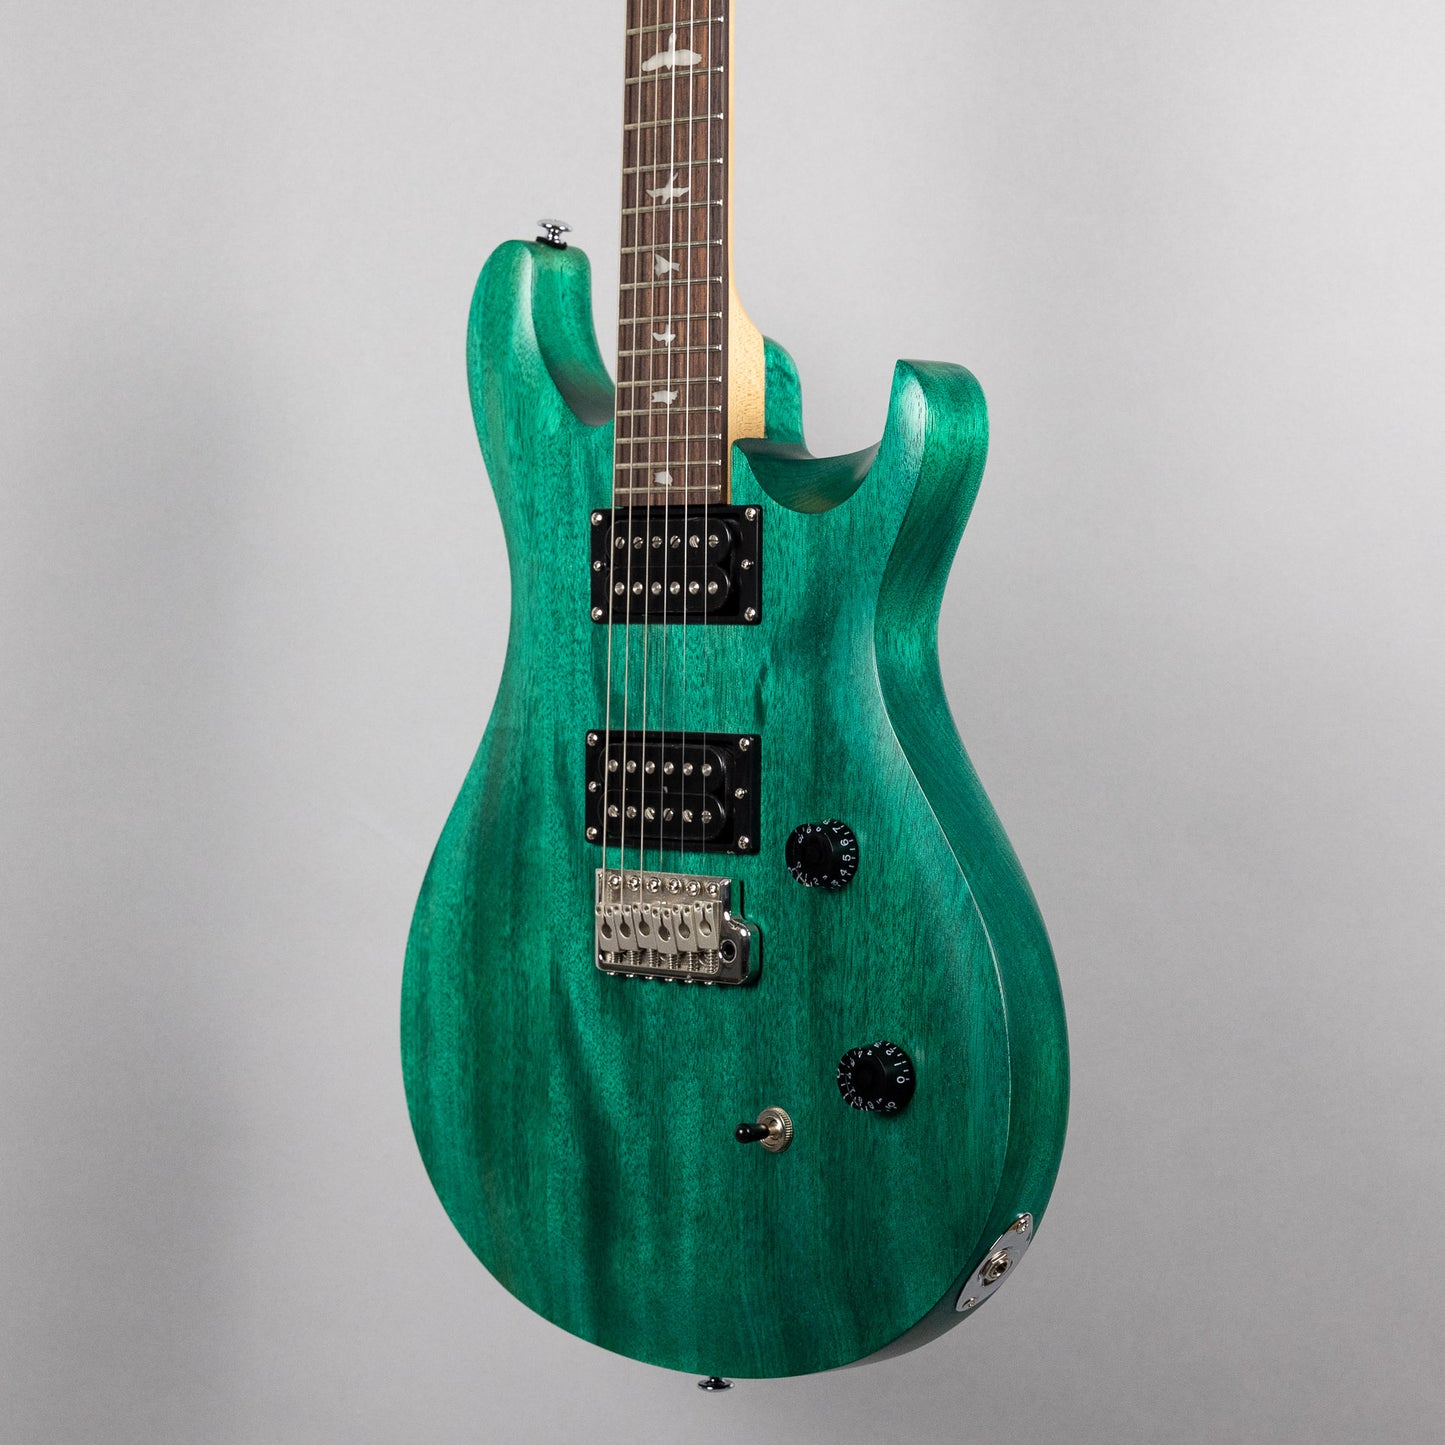 Paul Reed Smith SE CE24 Standard Satin in Turquoise (CTIF095322)